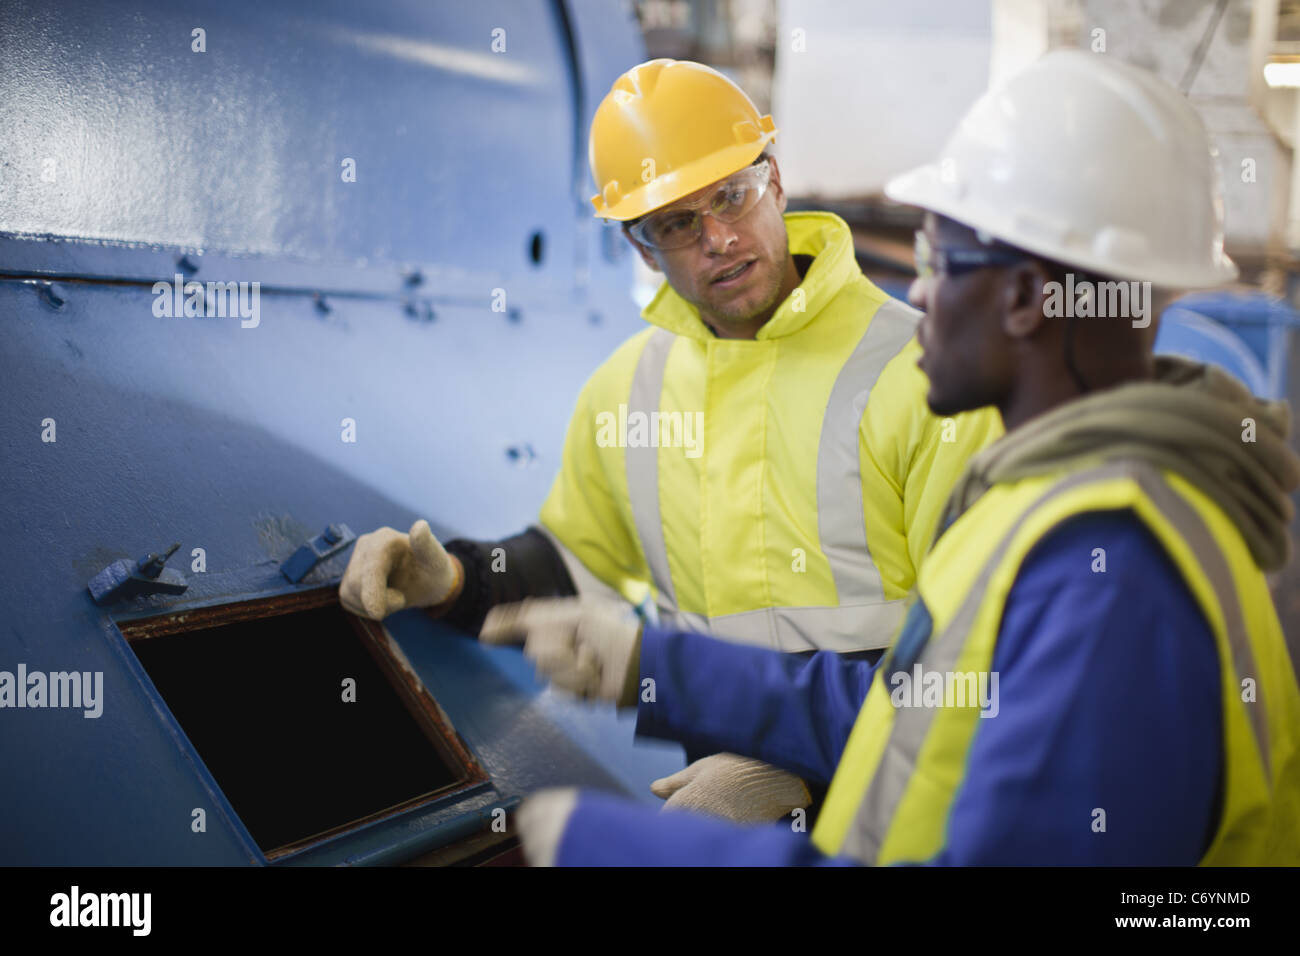 Workers examining machinery on oil rig Stock Photo